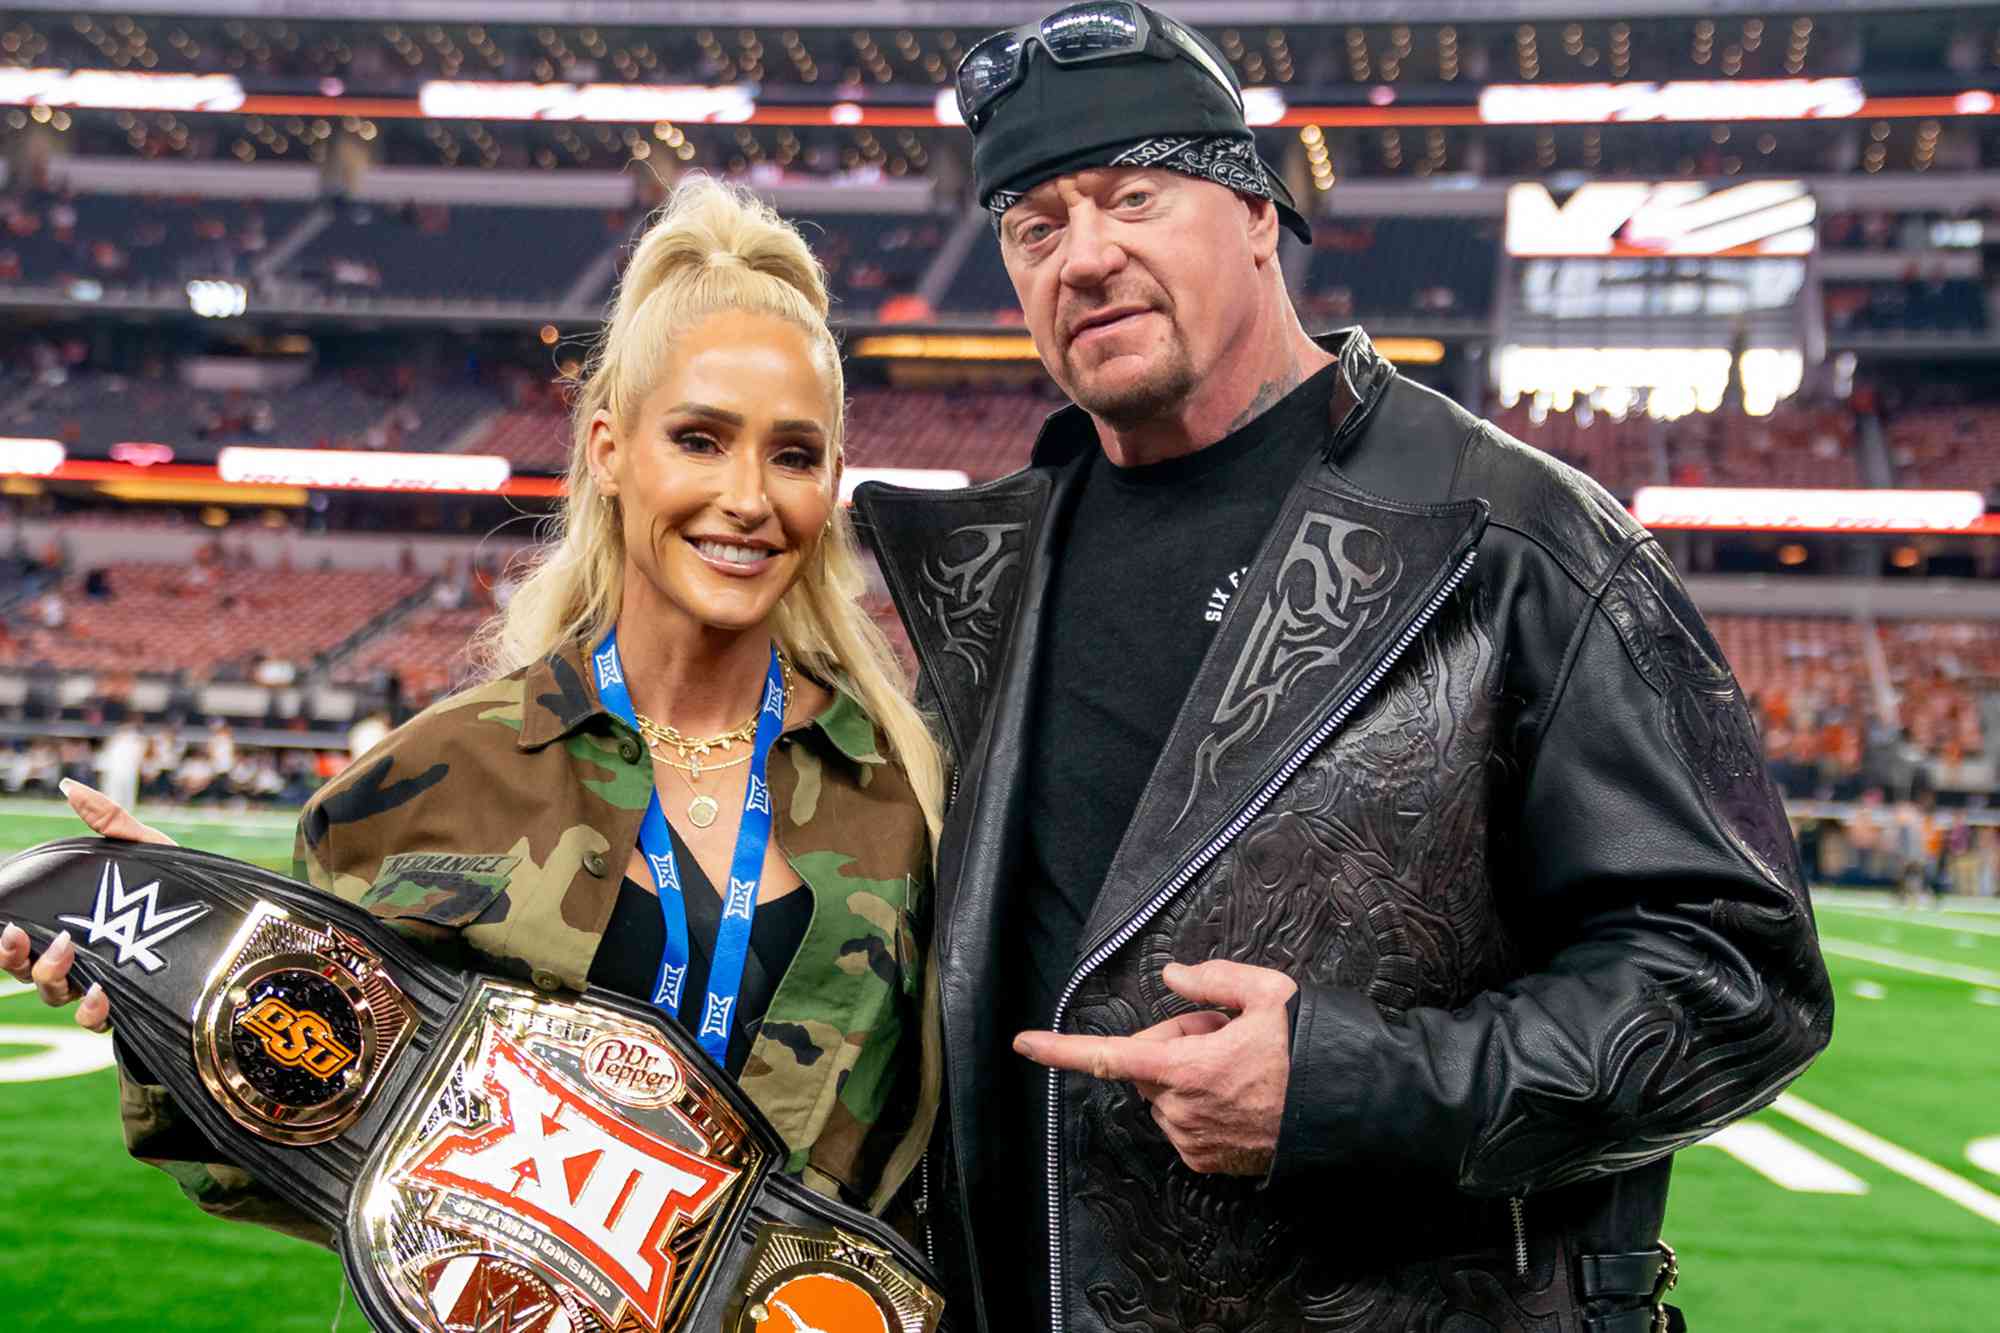 Who Is The Undertaker’s Wife? All About WWE Star Michelle McCool